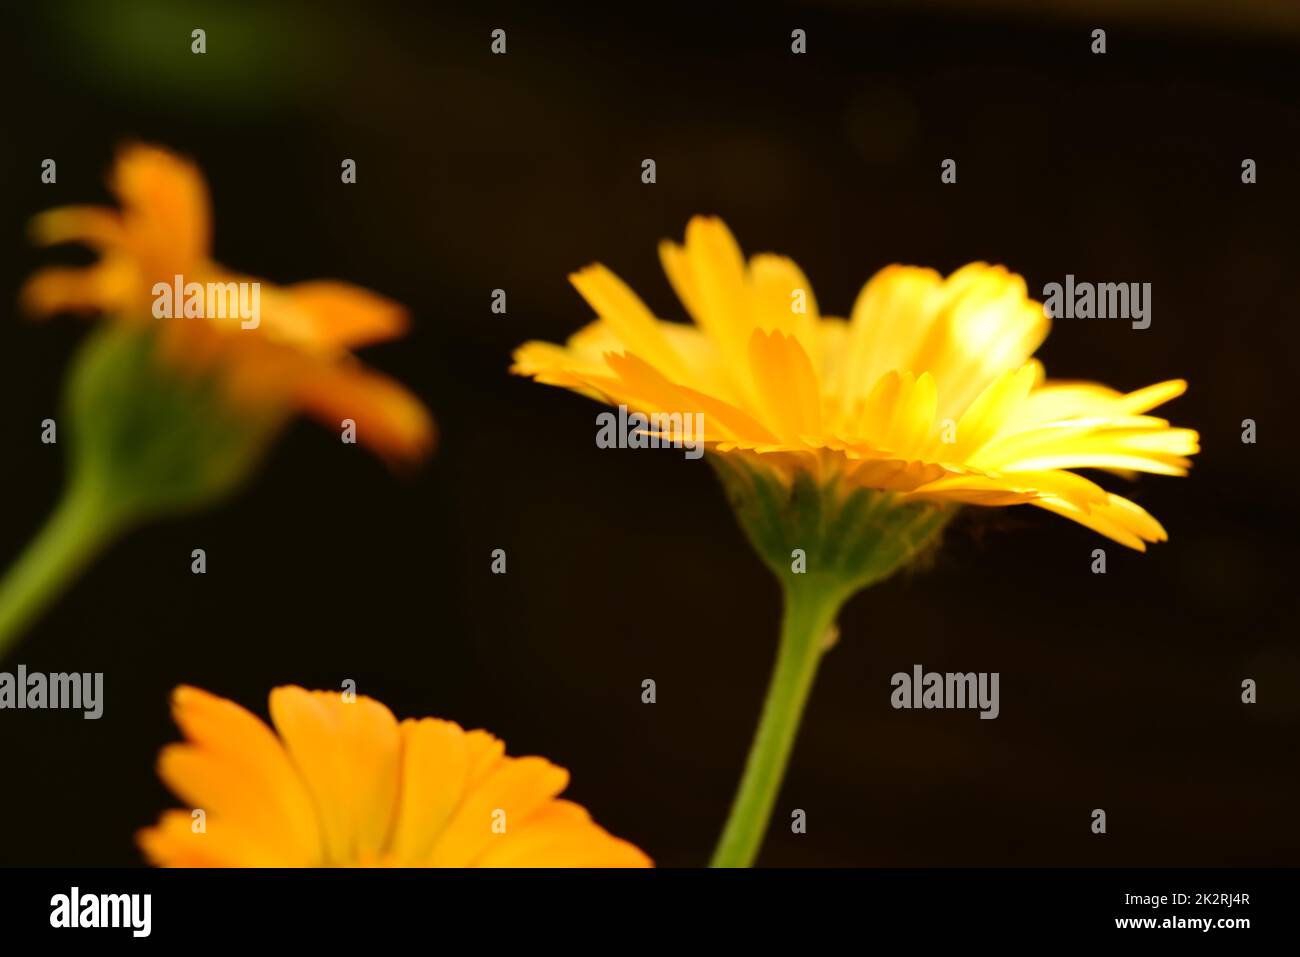 marigold, medicinal herb with flower Stock Photo